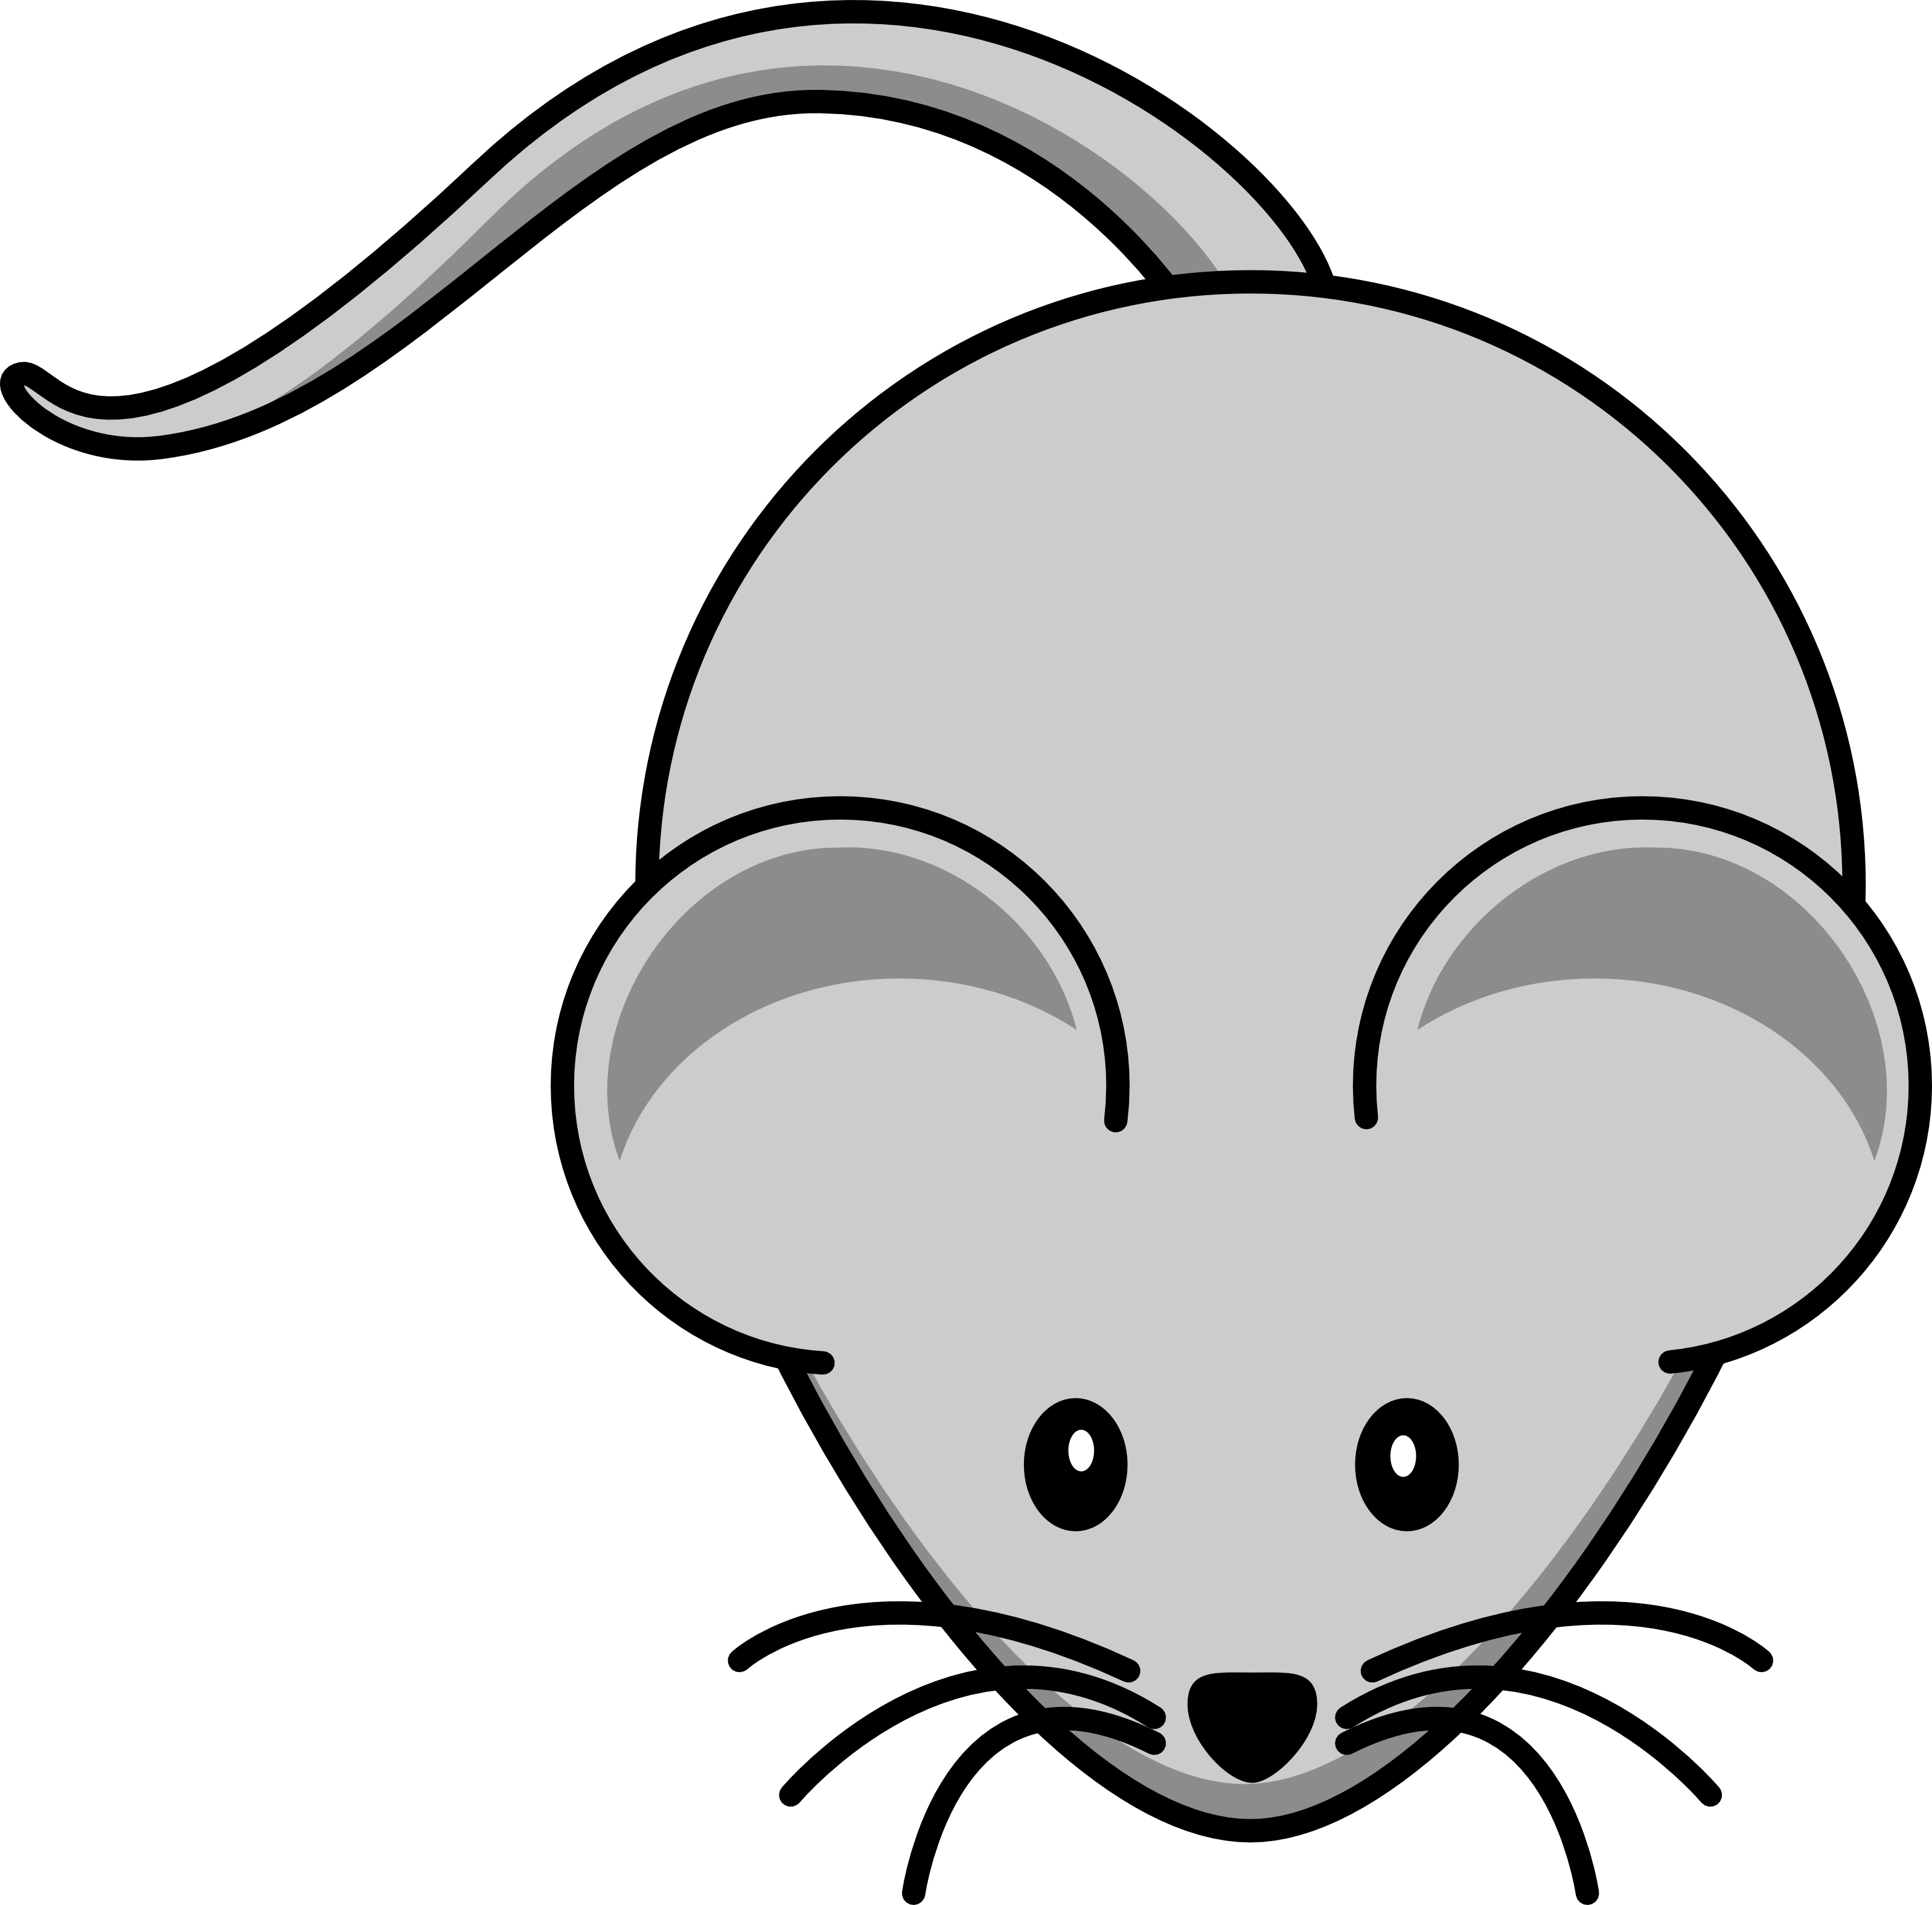 computer mouse clipart black and white - photo #12